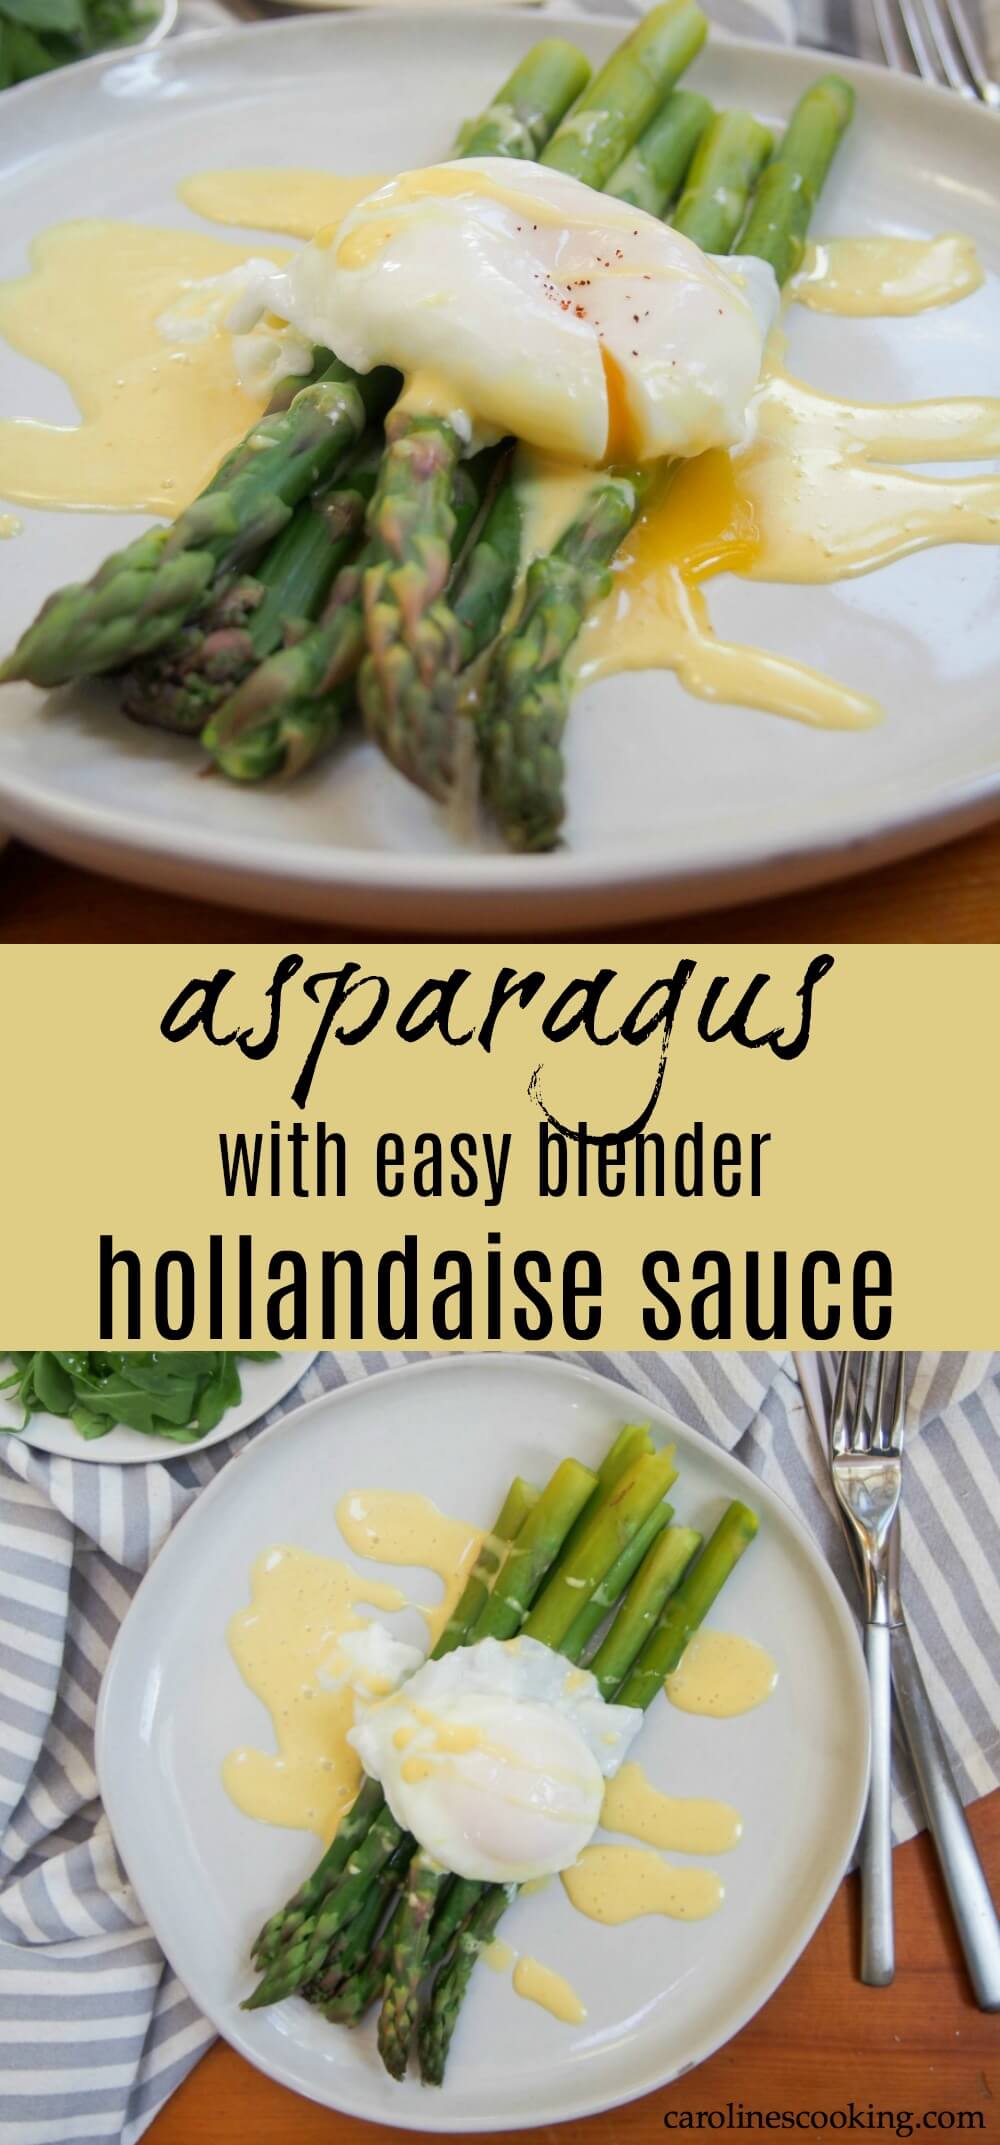 Asparagus with easy blender hollandaise sauce and poached egg makes an easy and delicious breakfast/brunch or lunch.  Full of the tastes of spring, it's light but feels that bit indulgent.  #ad #brunchweek #asparagus #brunch #dutch #vegetarian